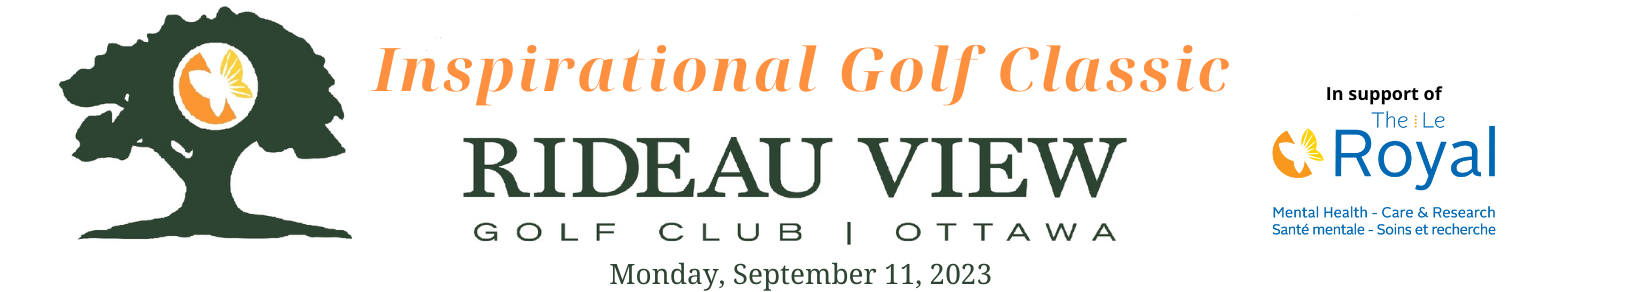 Rideau View Golf and Country Club in Manotick, Ontario, Canada